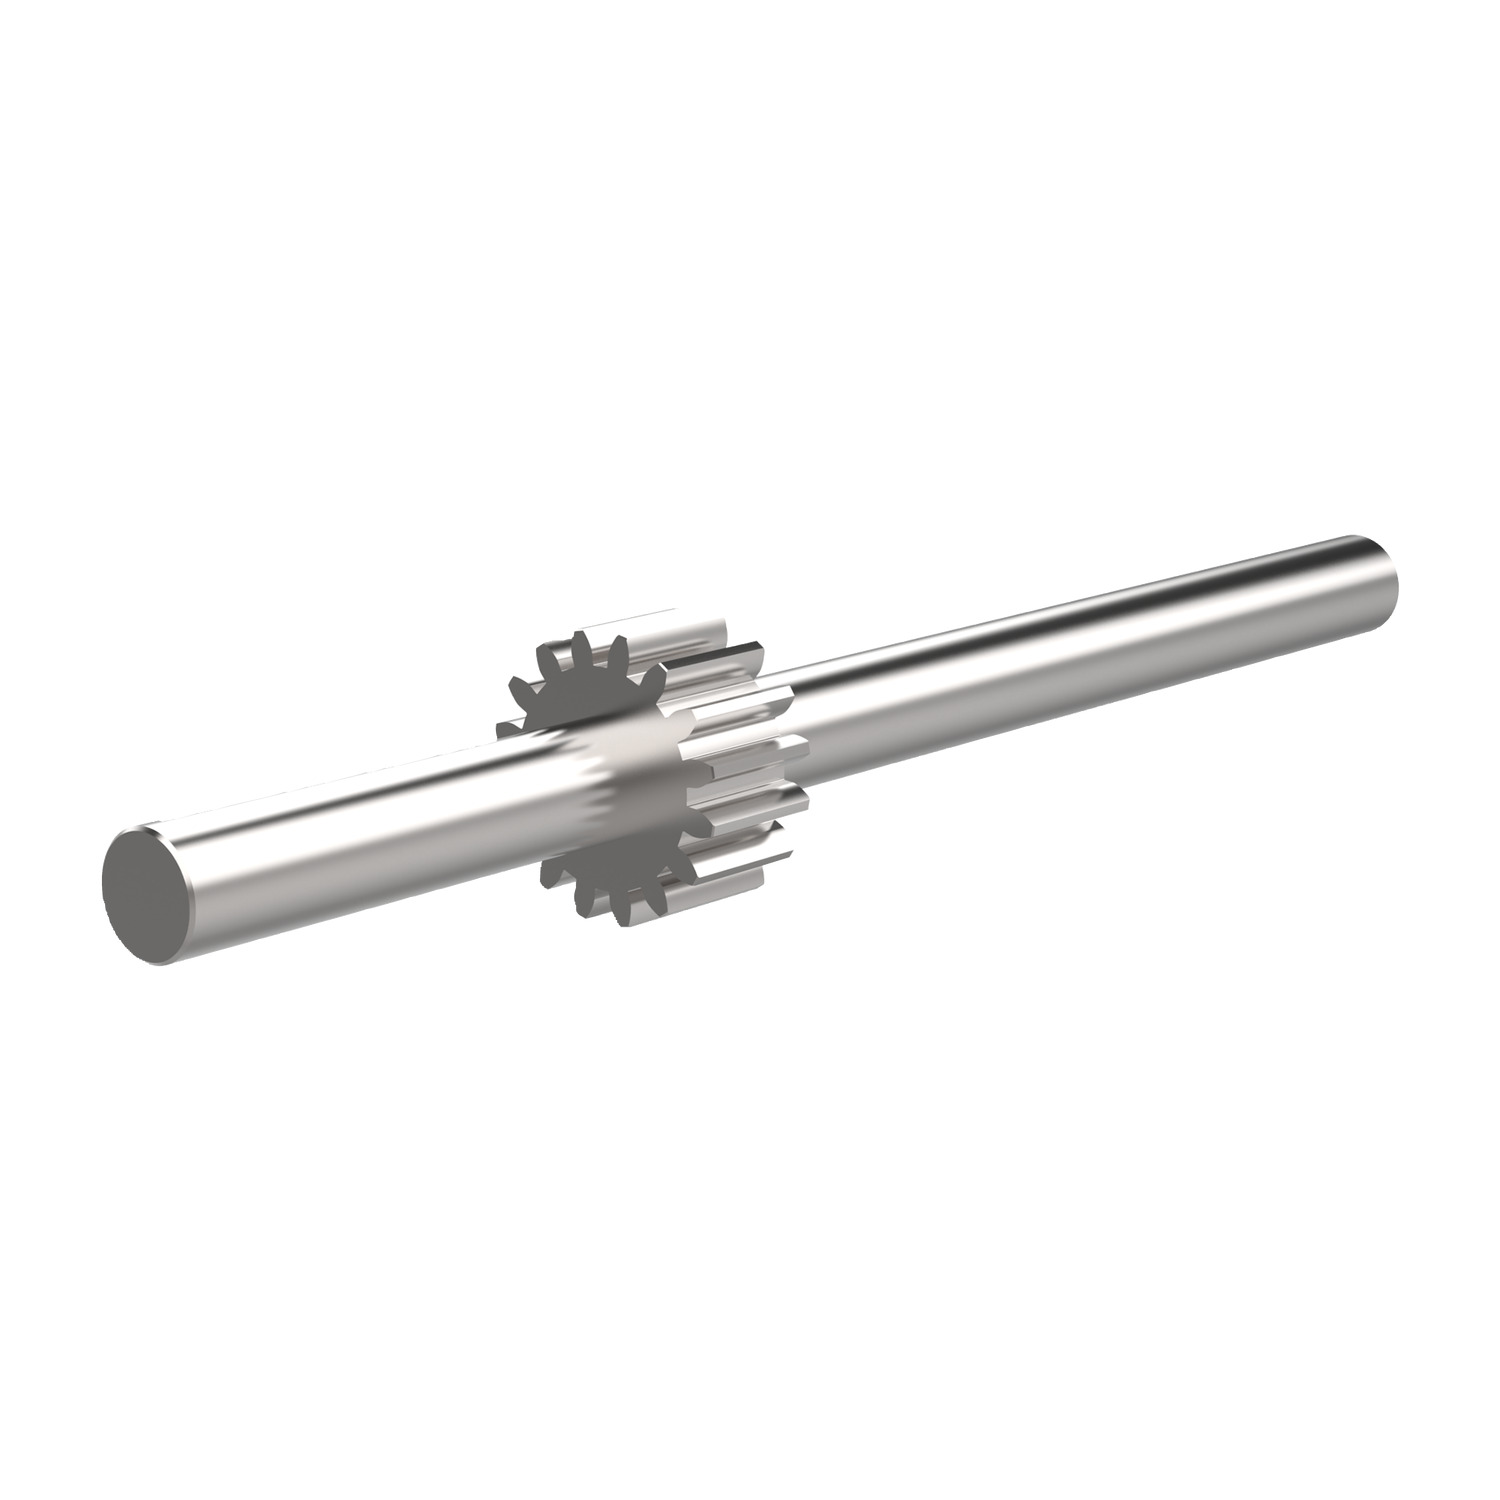 Product R5144, Spur Gears - Module 0.8 - Stainless stainless steel - 14-20 teeth - boreless / 